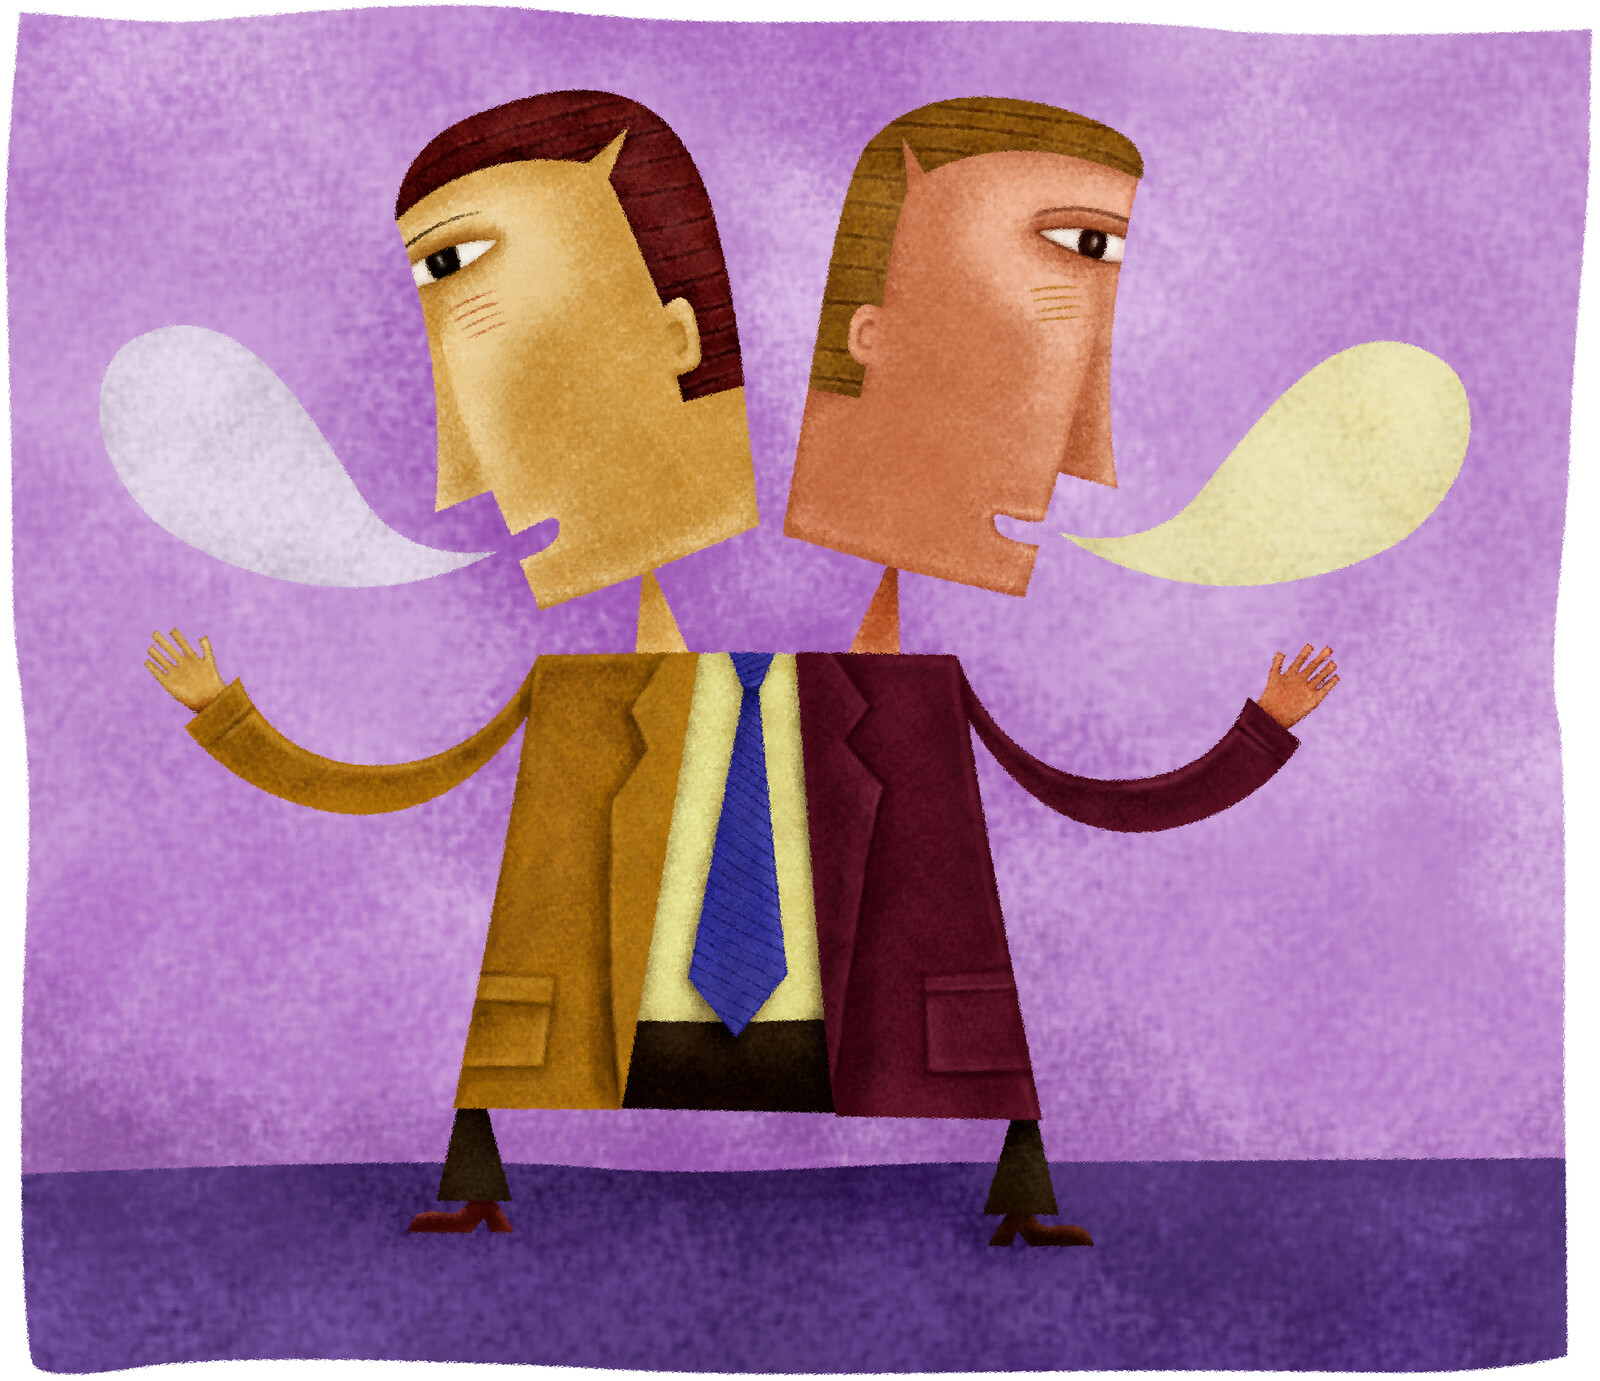 Cartoon of two-headed man in business suit, each head speaking - a thought bubble coming from their mouths, left blank for us to fill in what we think they're saying. All to indicate one person saying two different things at once.